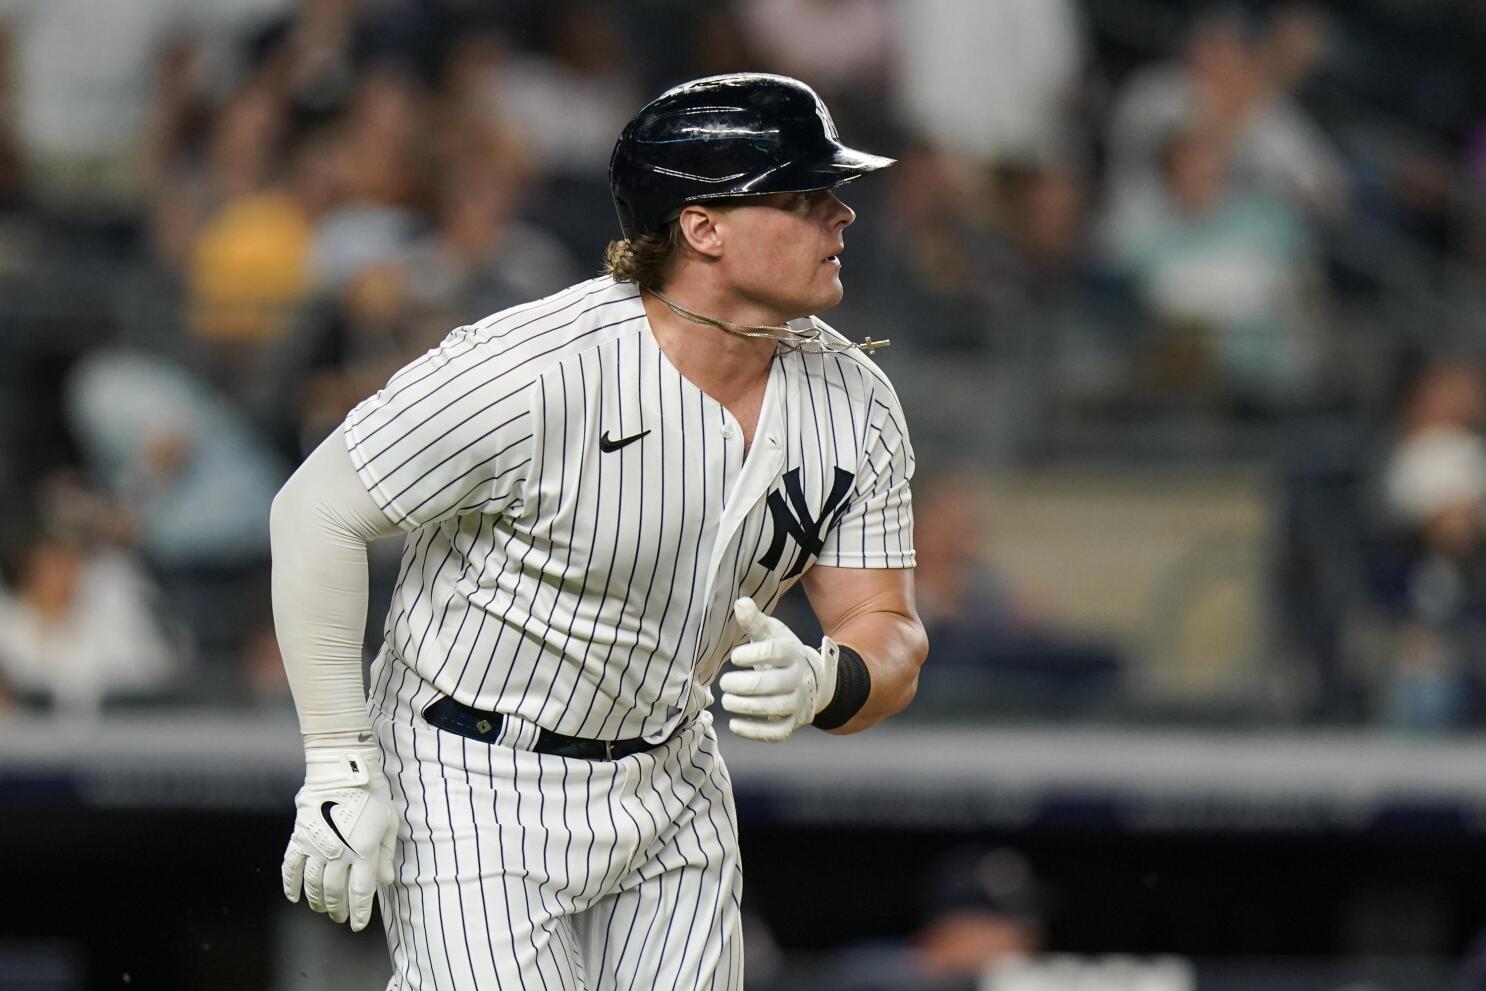 With A Chip On His Shoulder And His Jersey Unbuttoned, Luke Voit